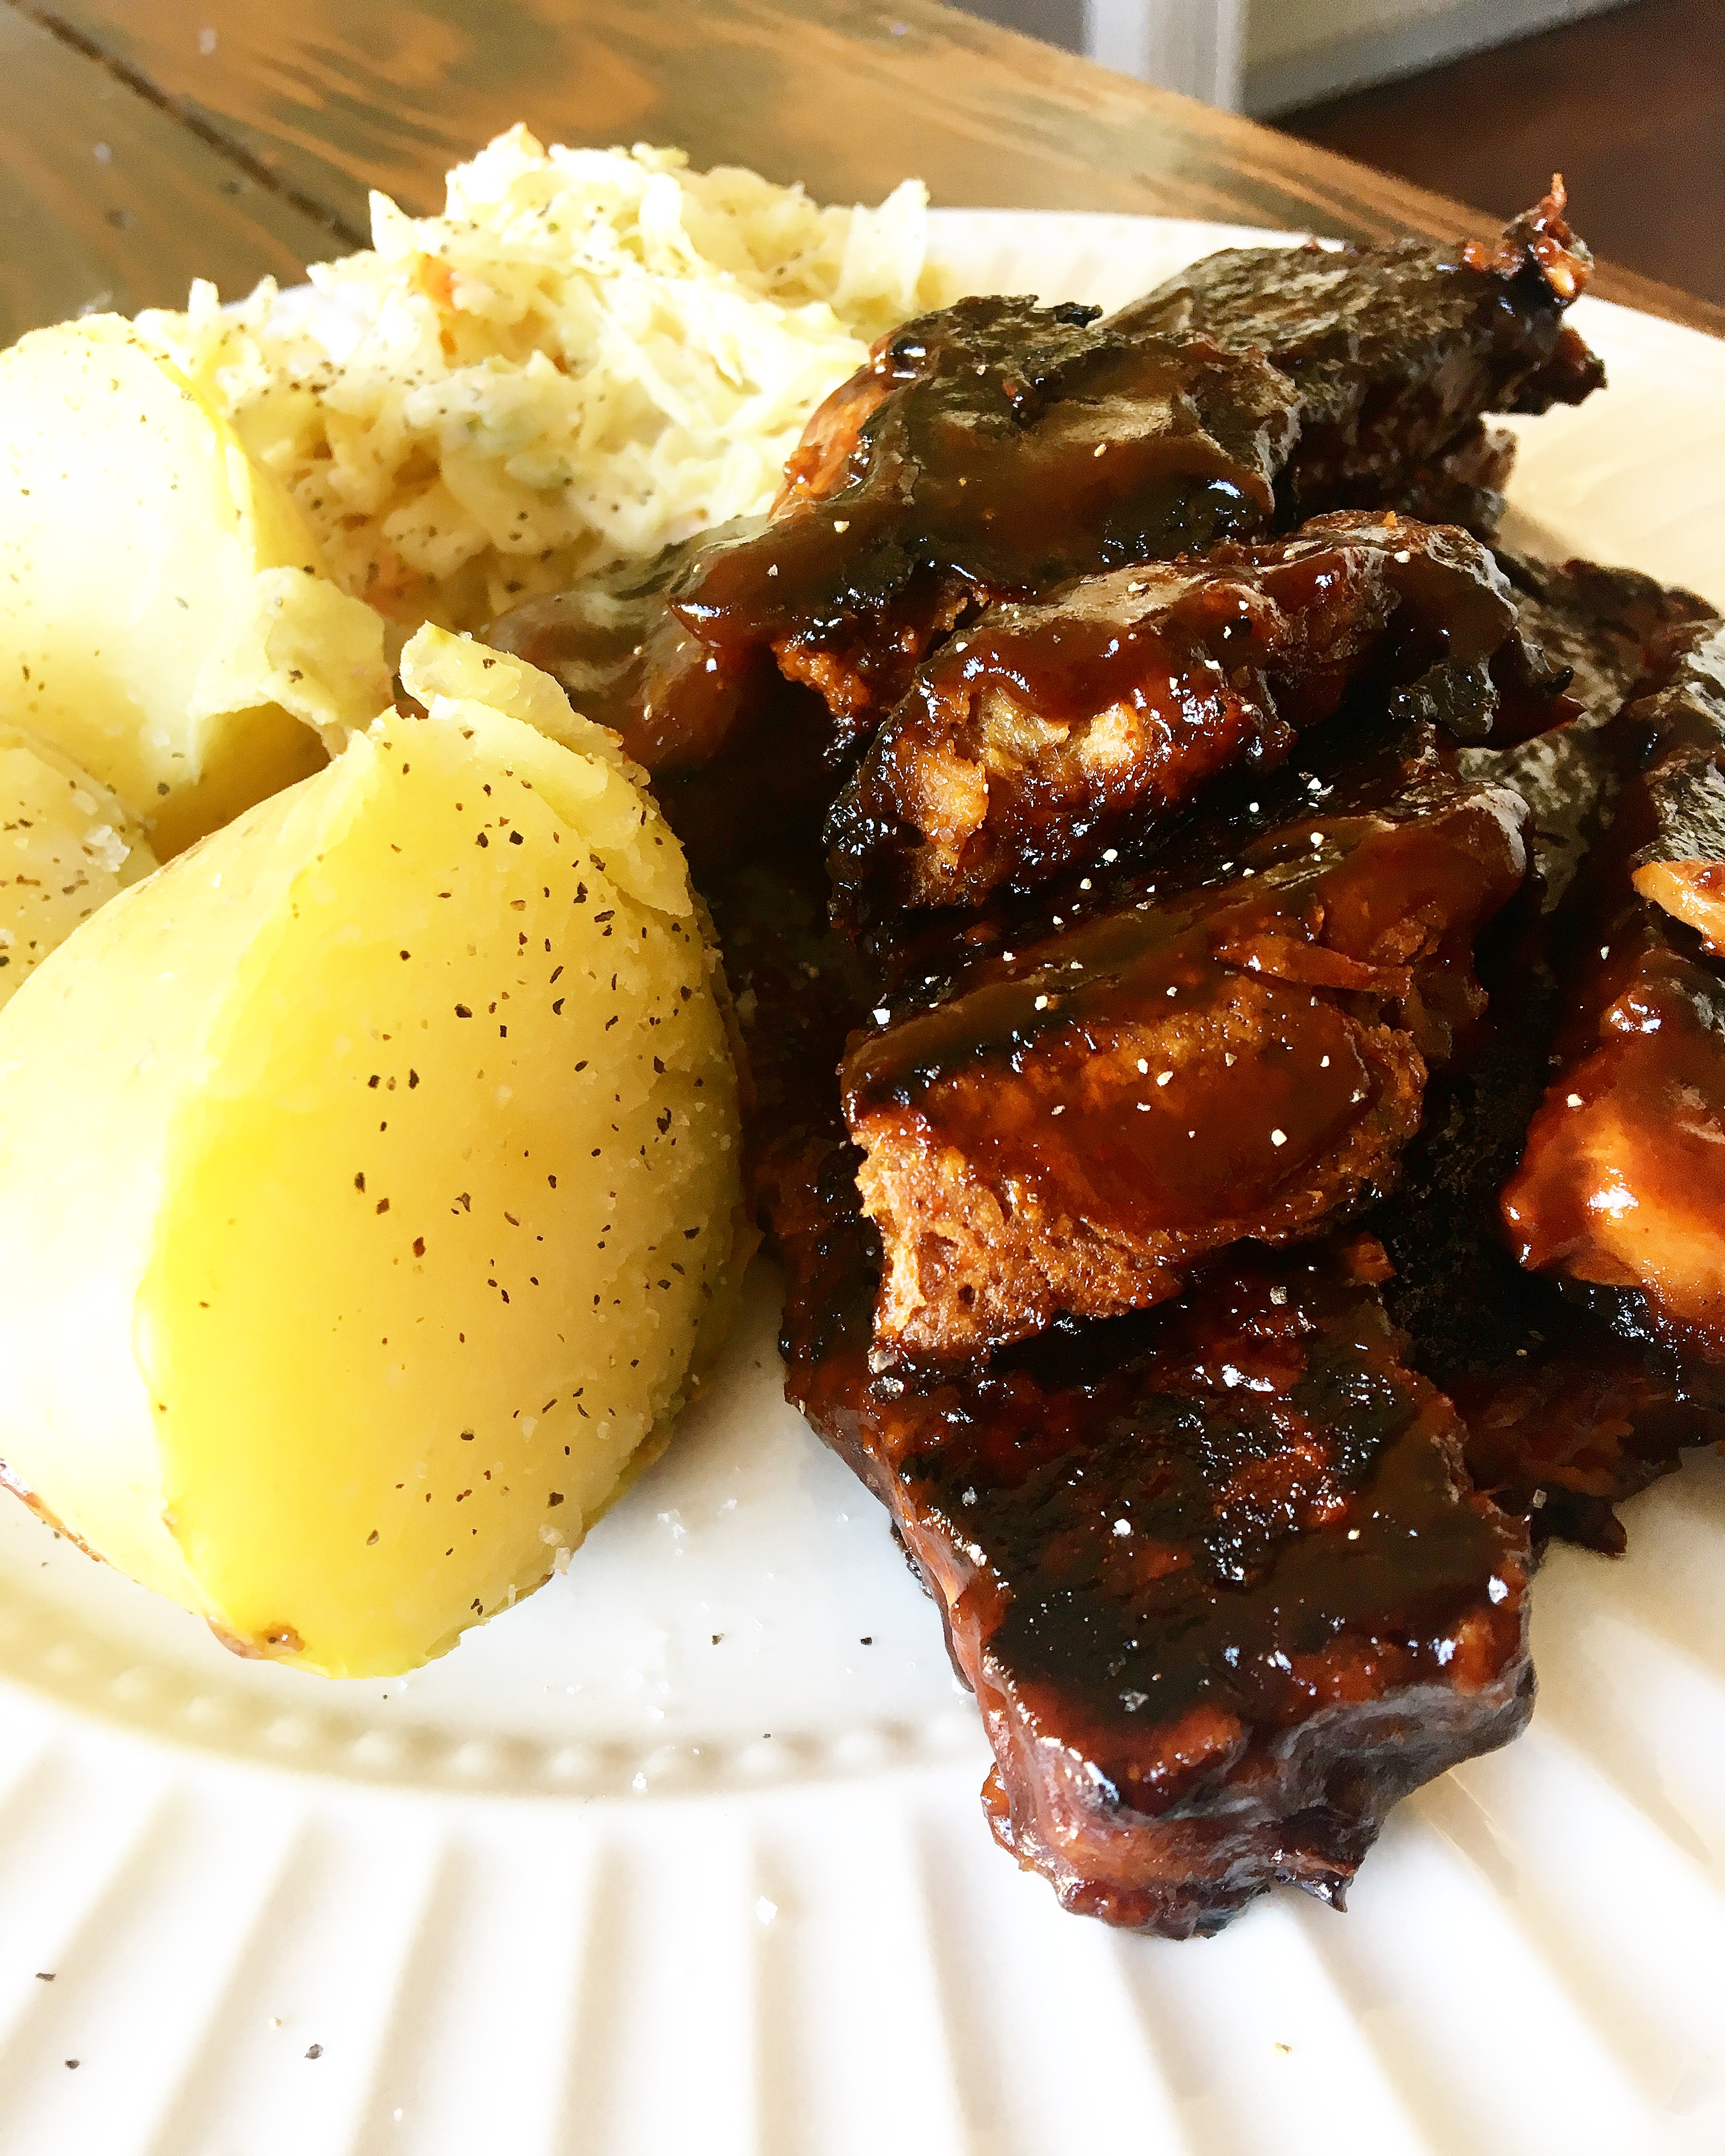 Succulent Vegan Ribs from Nick's Kitchen in Daly City,'